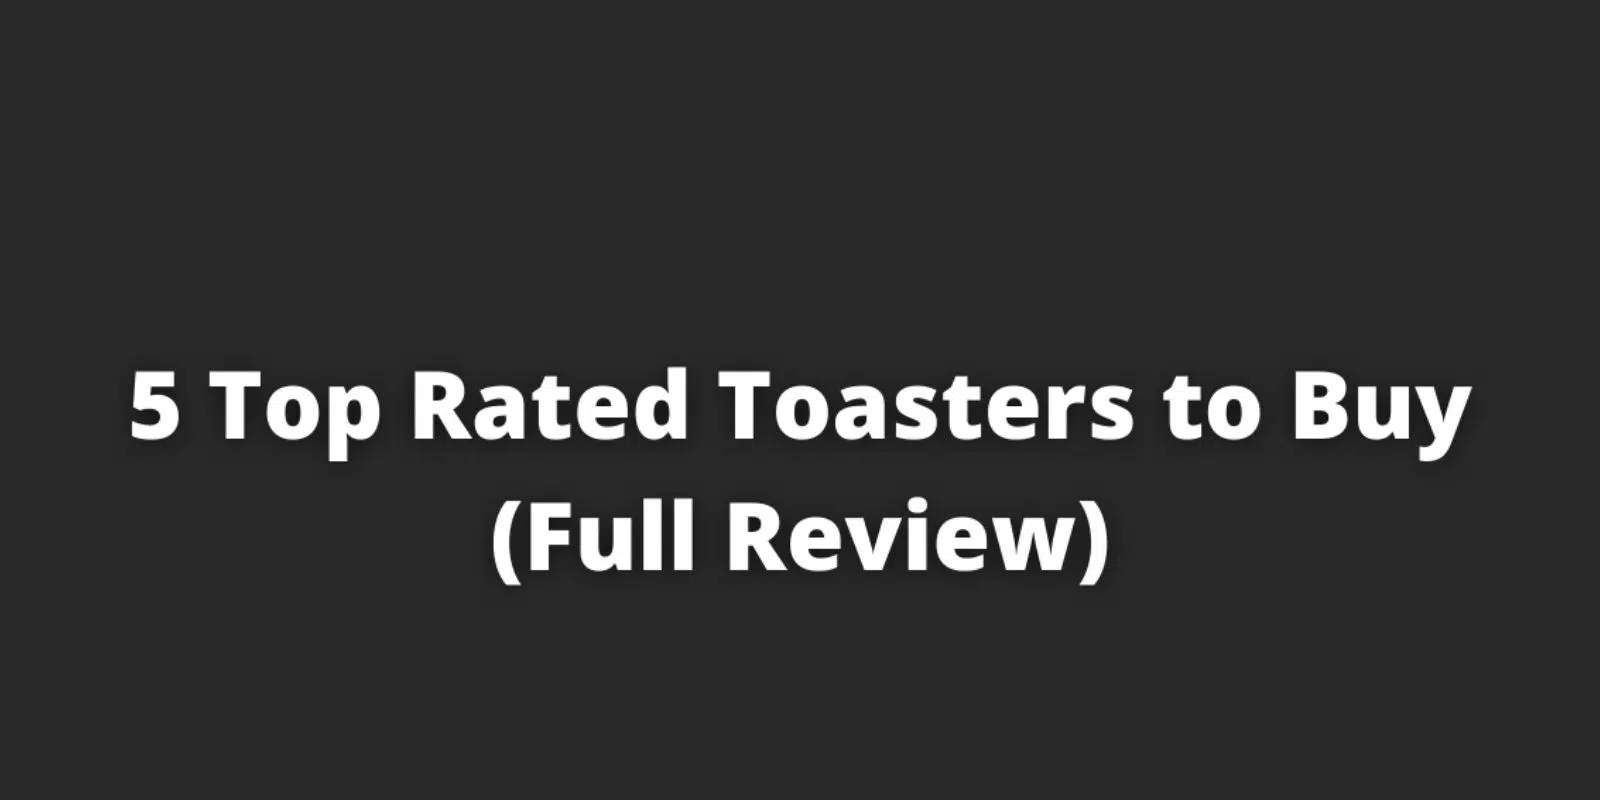 5 Top Rated Toasters to Buy (Full Review)